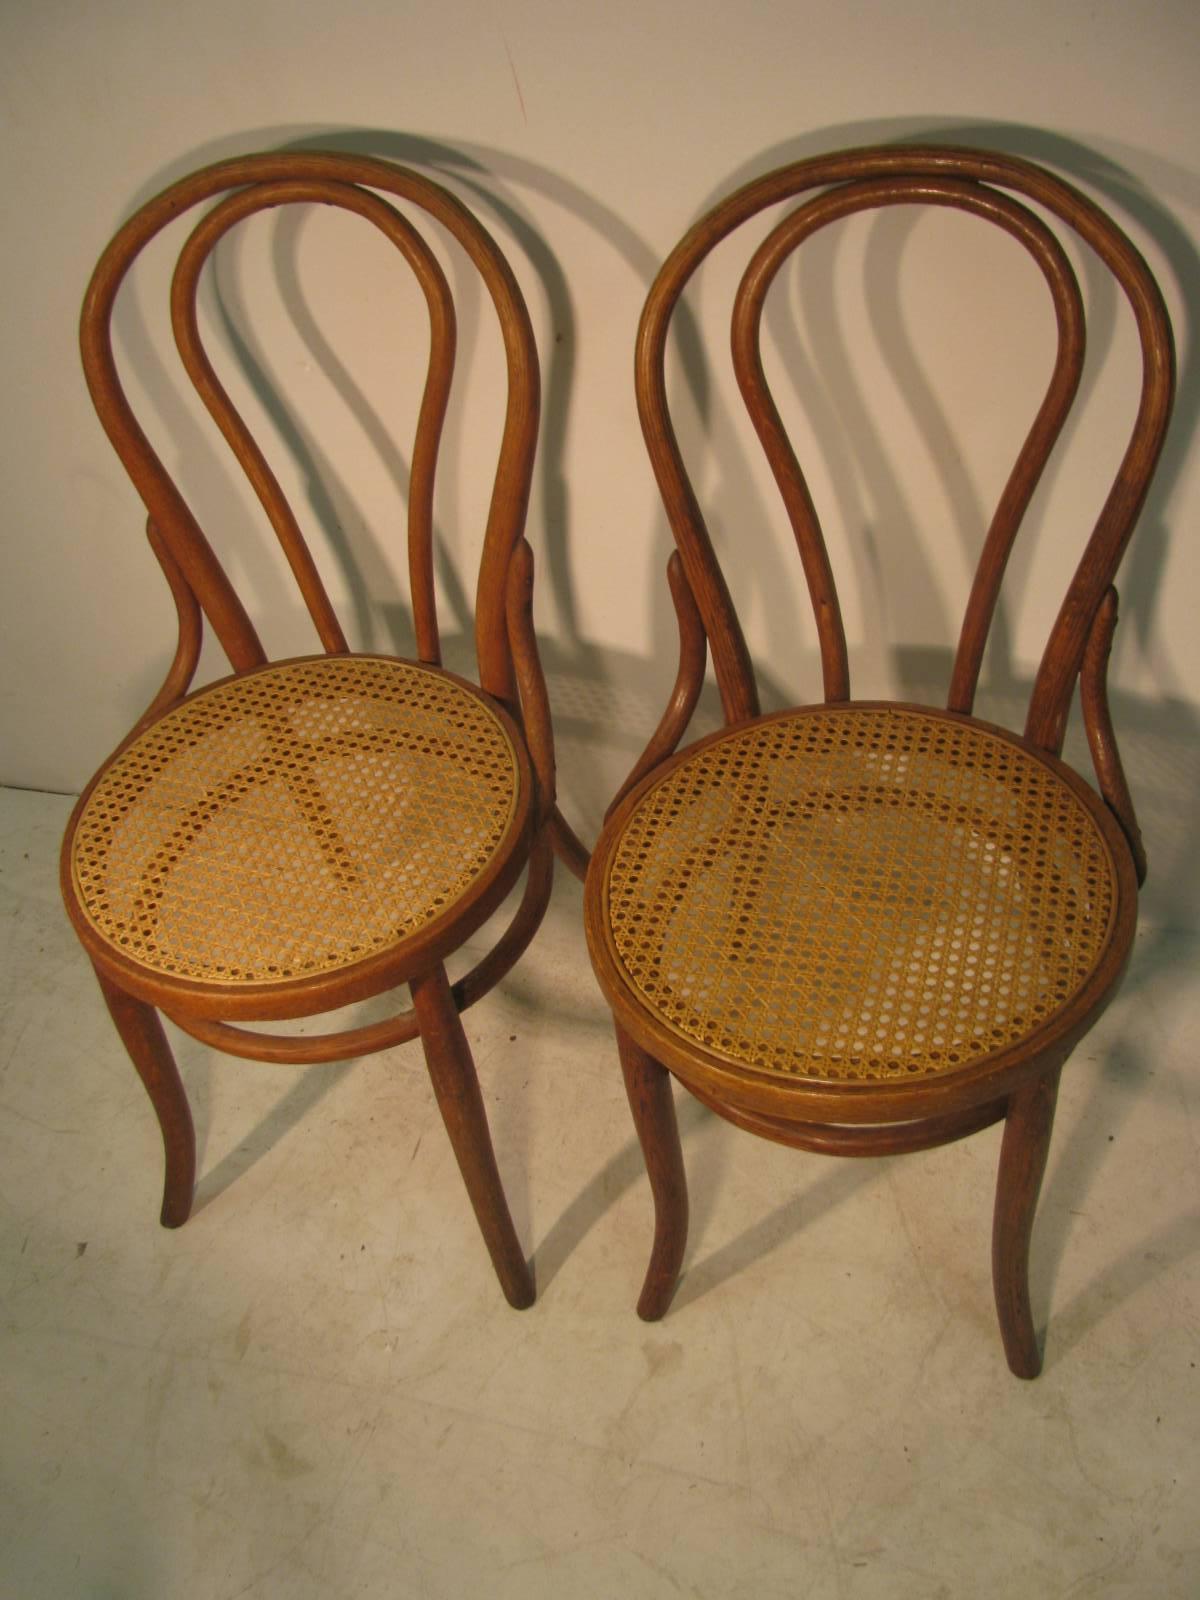 Modern Twenty 19th Century Bent Wood Cafe Dining Chairs with Caned Seats